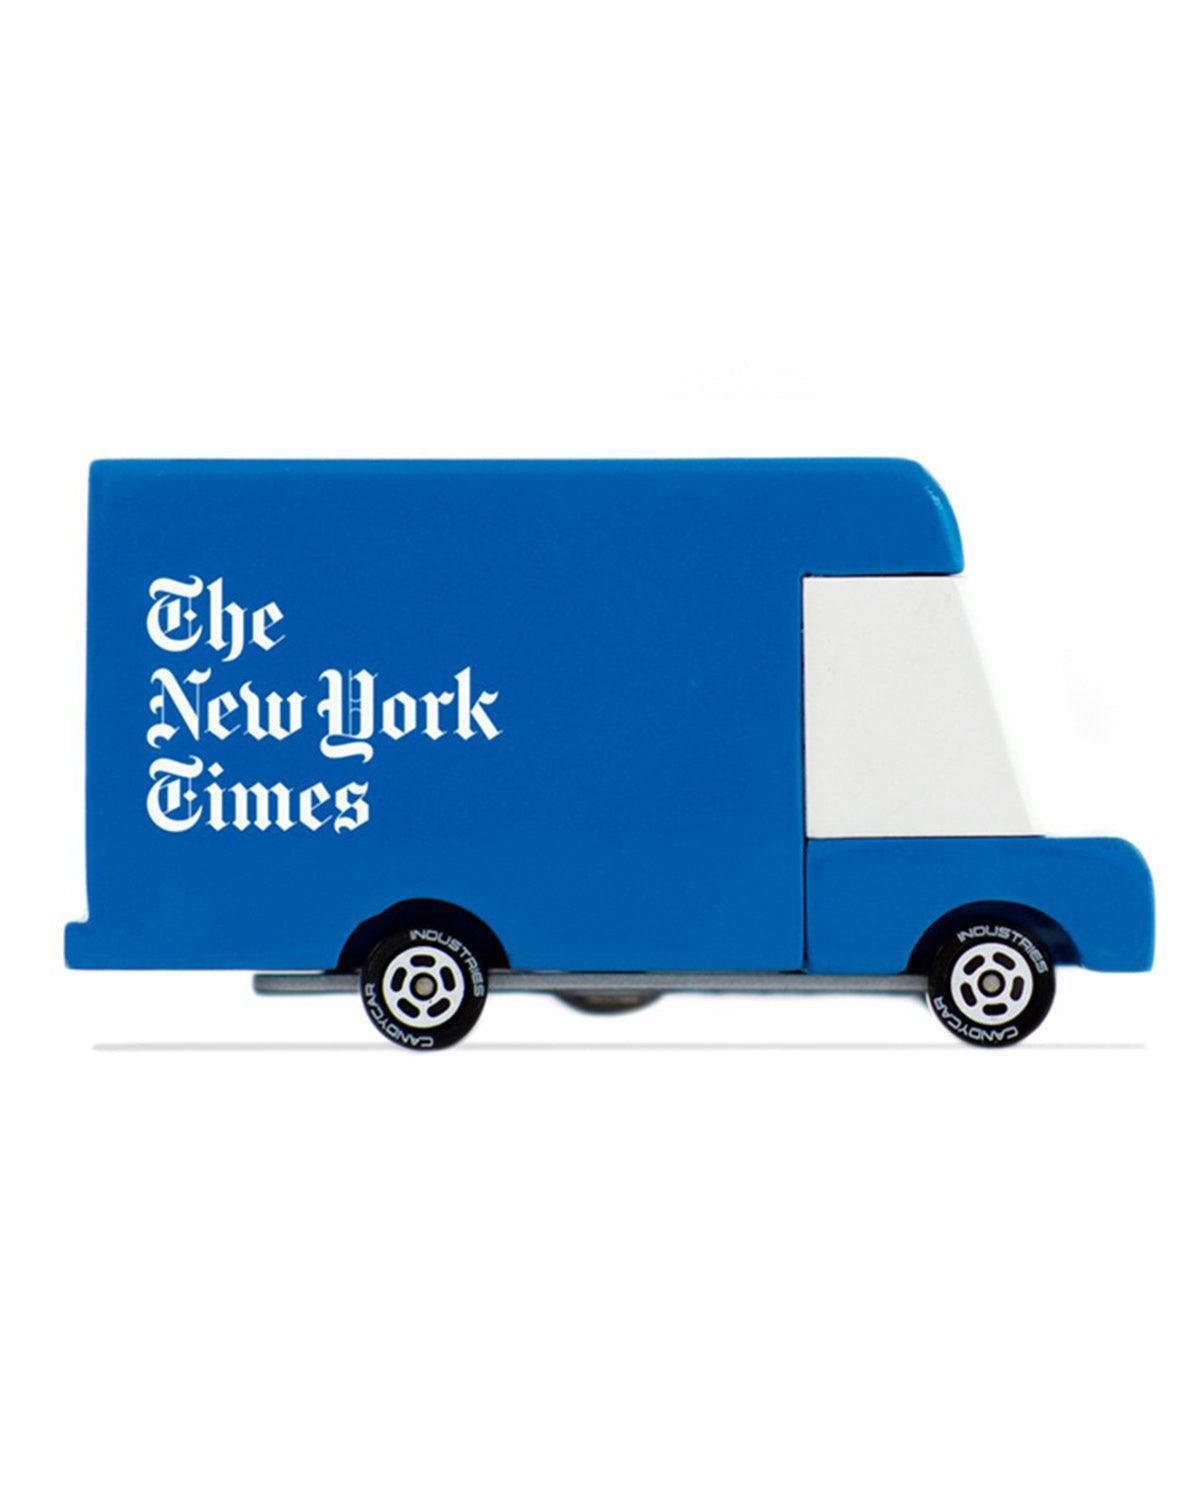 New York Times Van - Candylab - Why and Whale